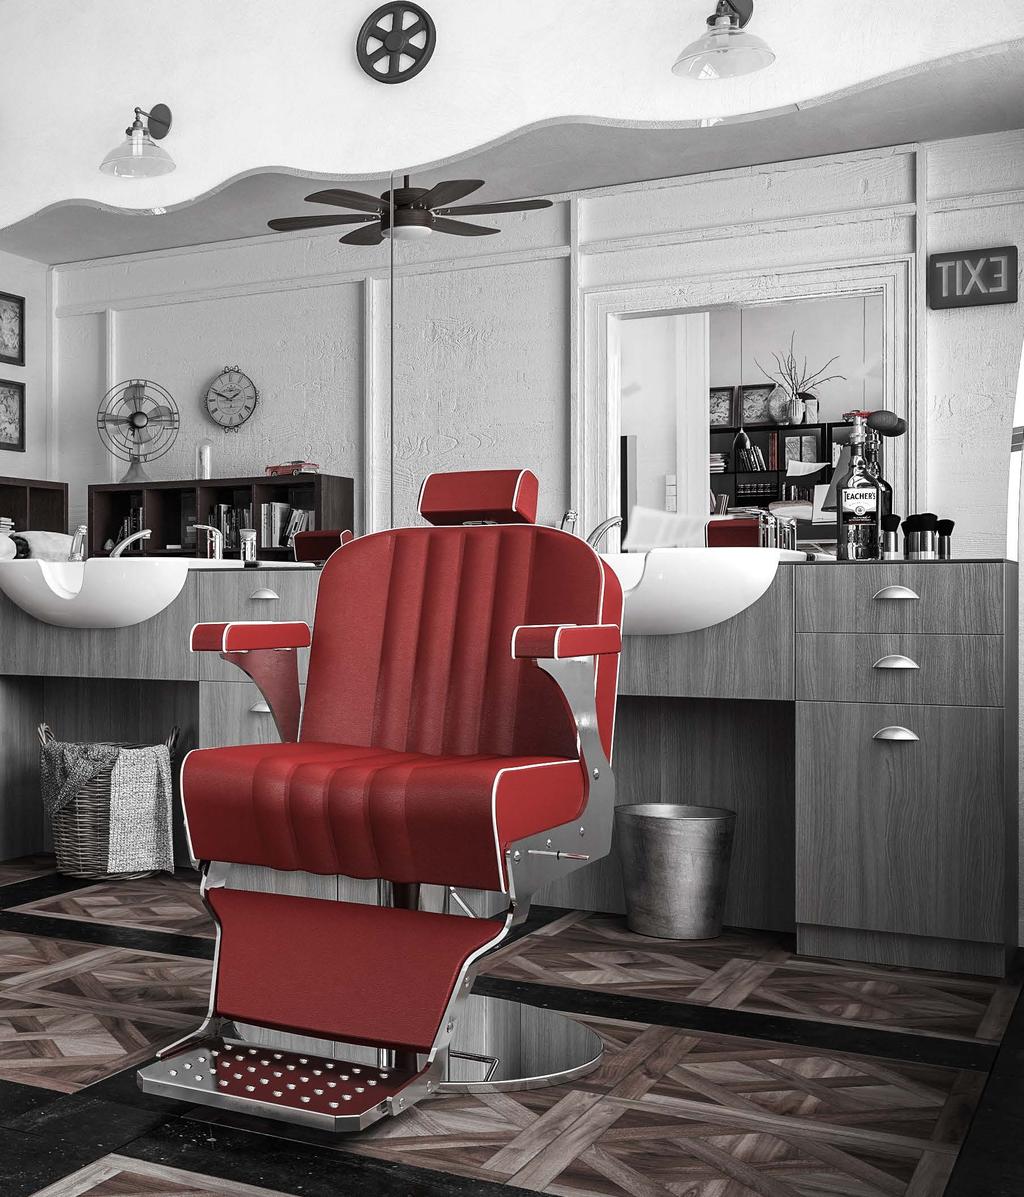 remember the old-time BARBERSHOP that Dad